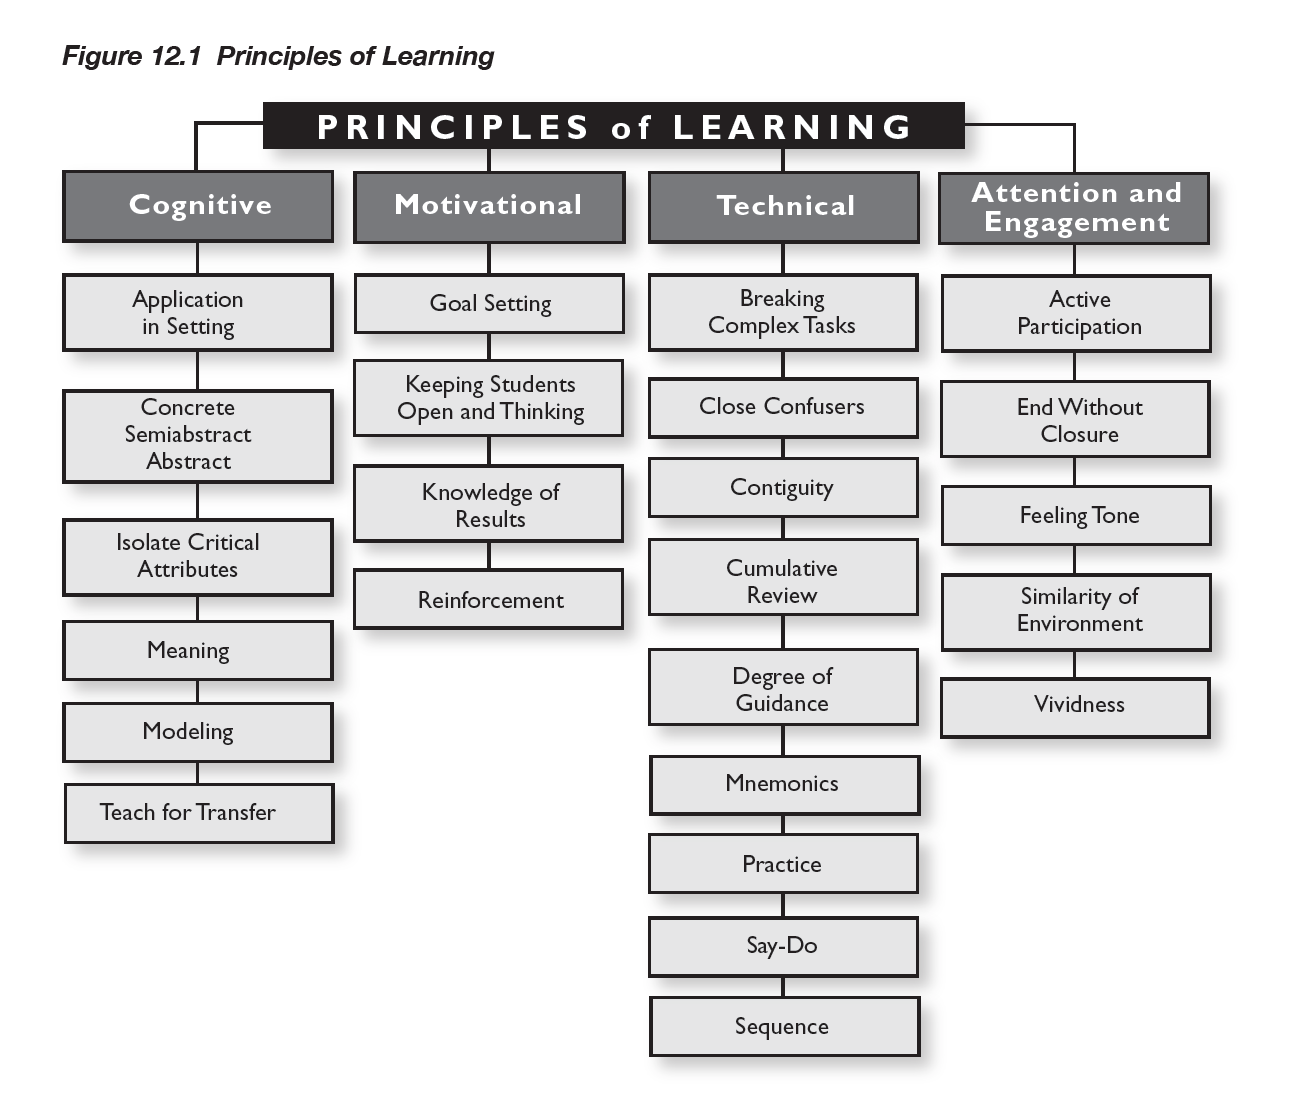 Principles of Learning Fig. 12.1.png